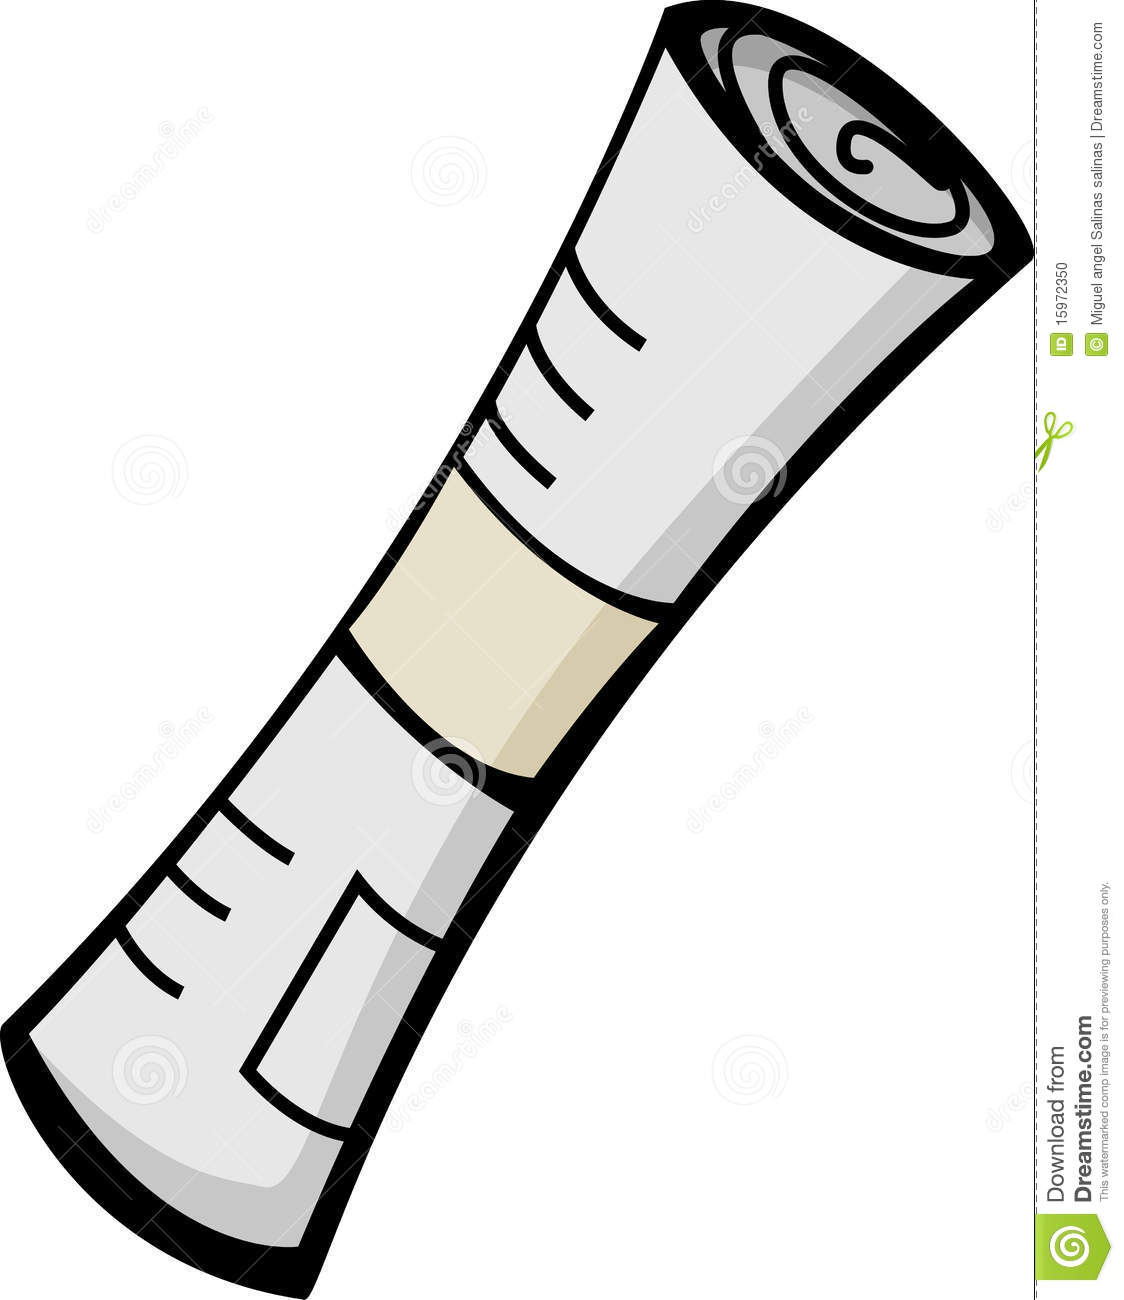 Rolled newspaper clipart.